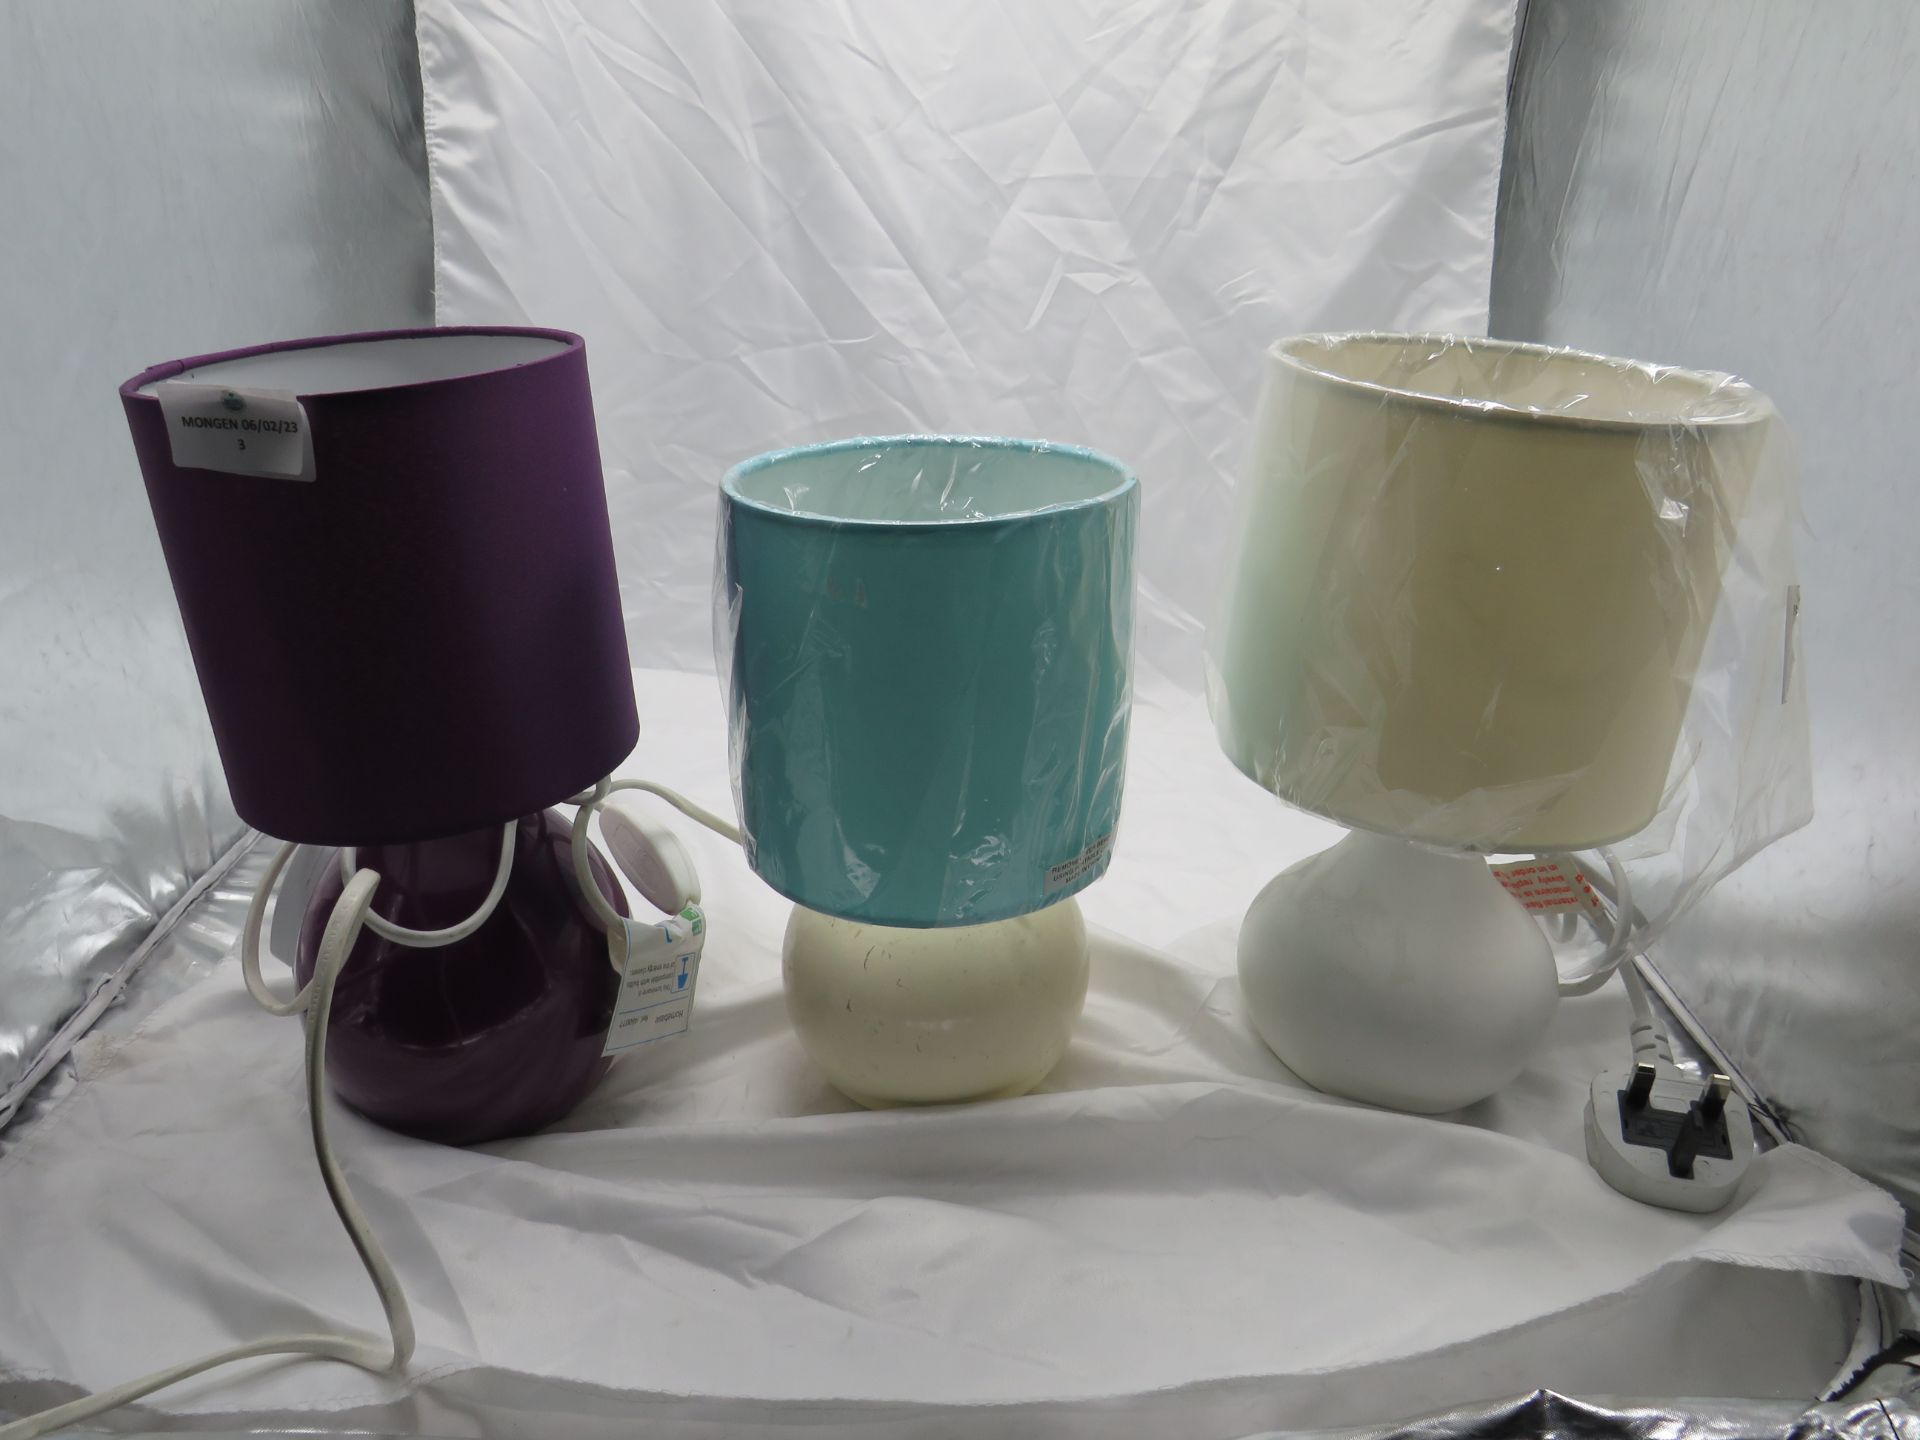 1x Purple Small Table Lamp - No Packaging. 1x White Small Table Lamp - No Packaging. 1x Blue & White